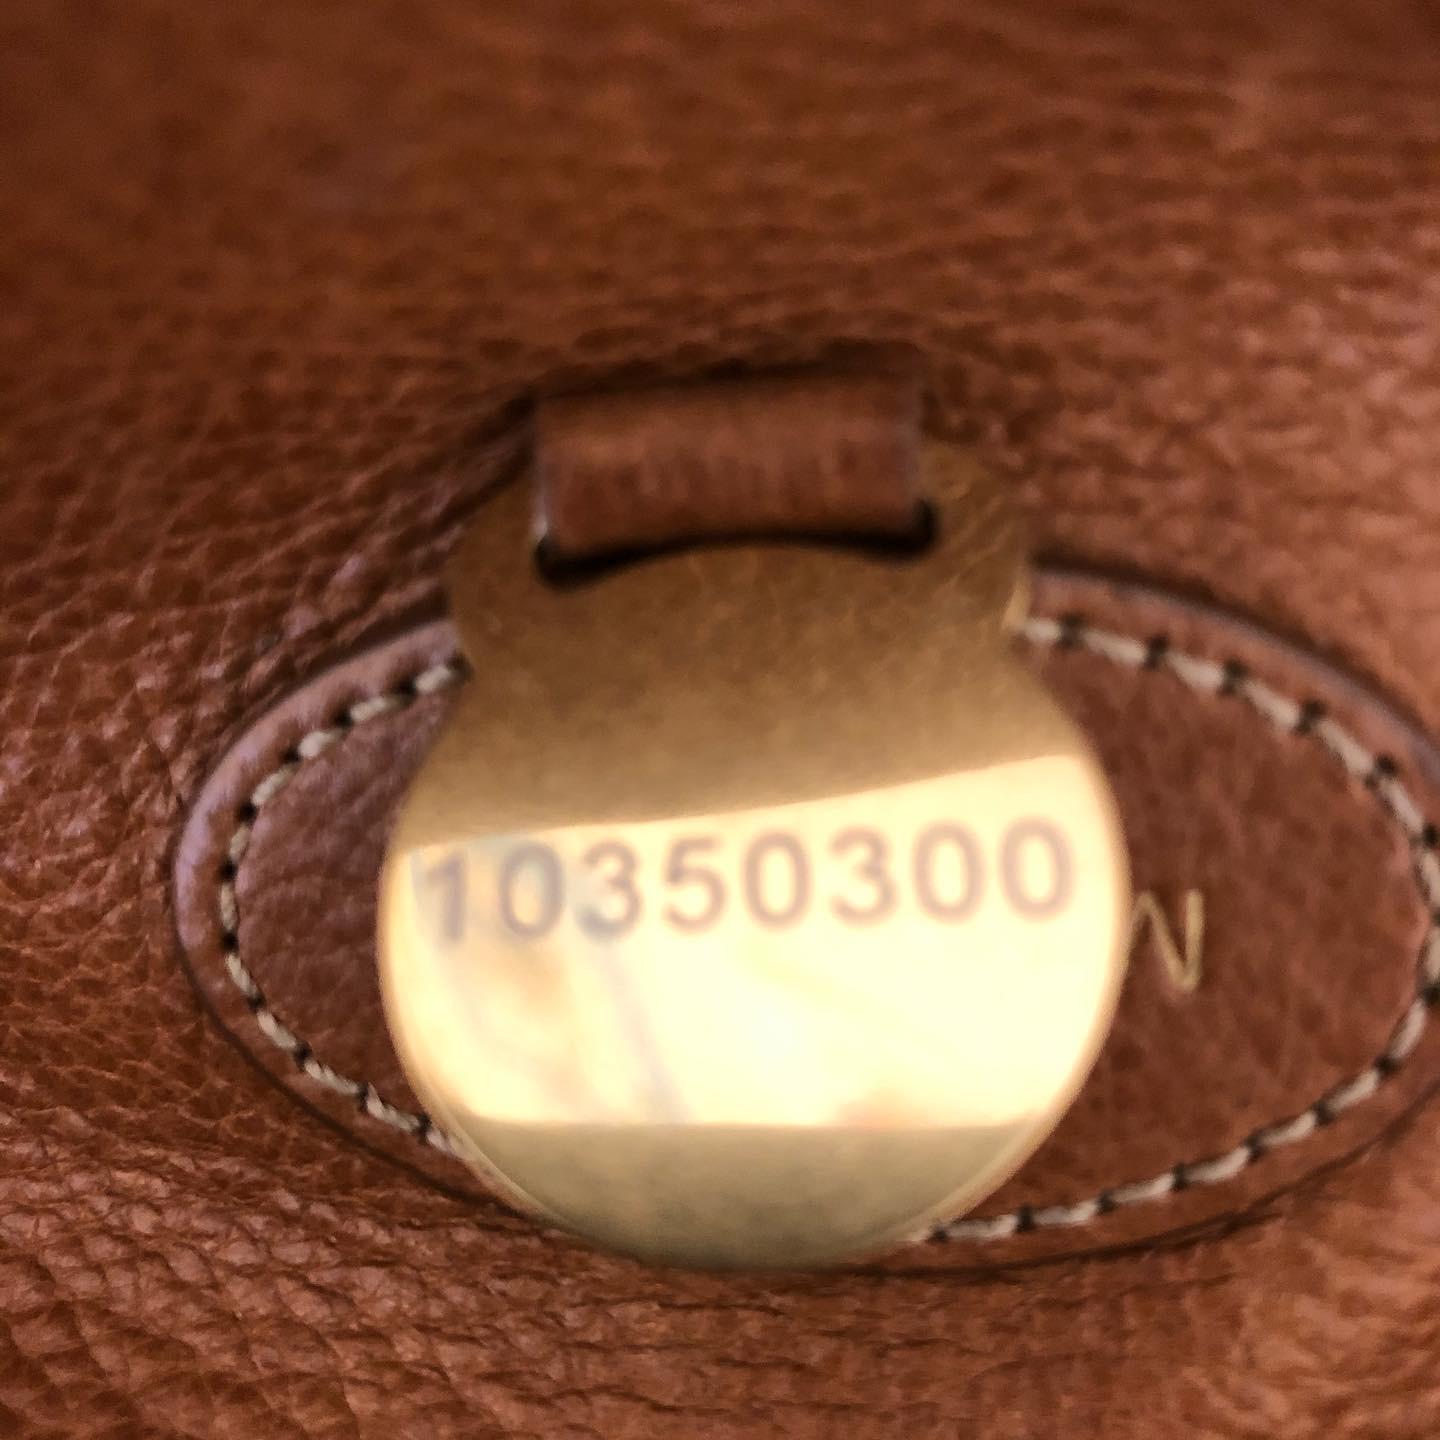 This is an iconic bag by UK company Mulberry known for its excellent craftsmanship. The handbag is in very good condition with plenty of storage room; a leather lining with a zipped pocket, and detachable strap. The key is missing, so I have marked